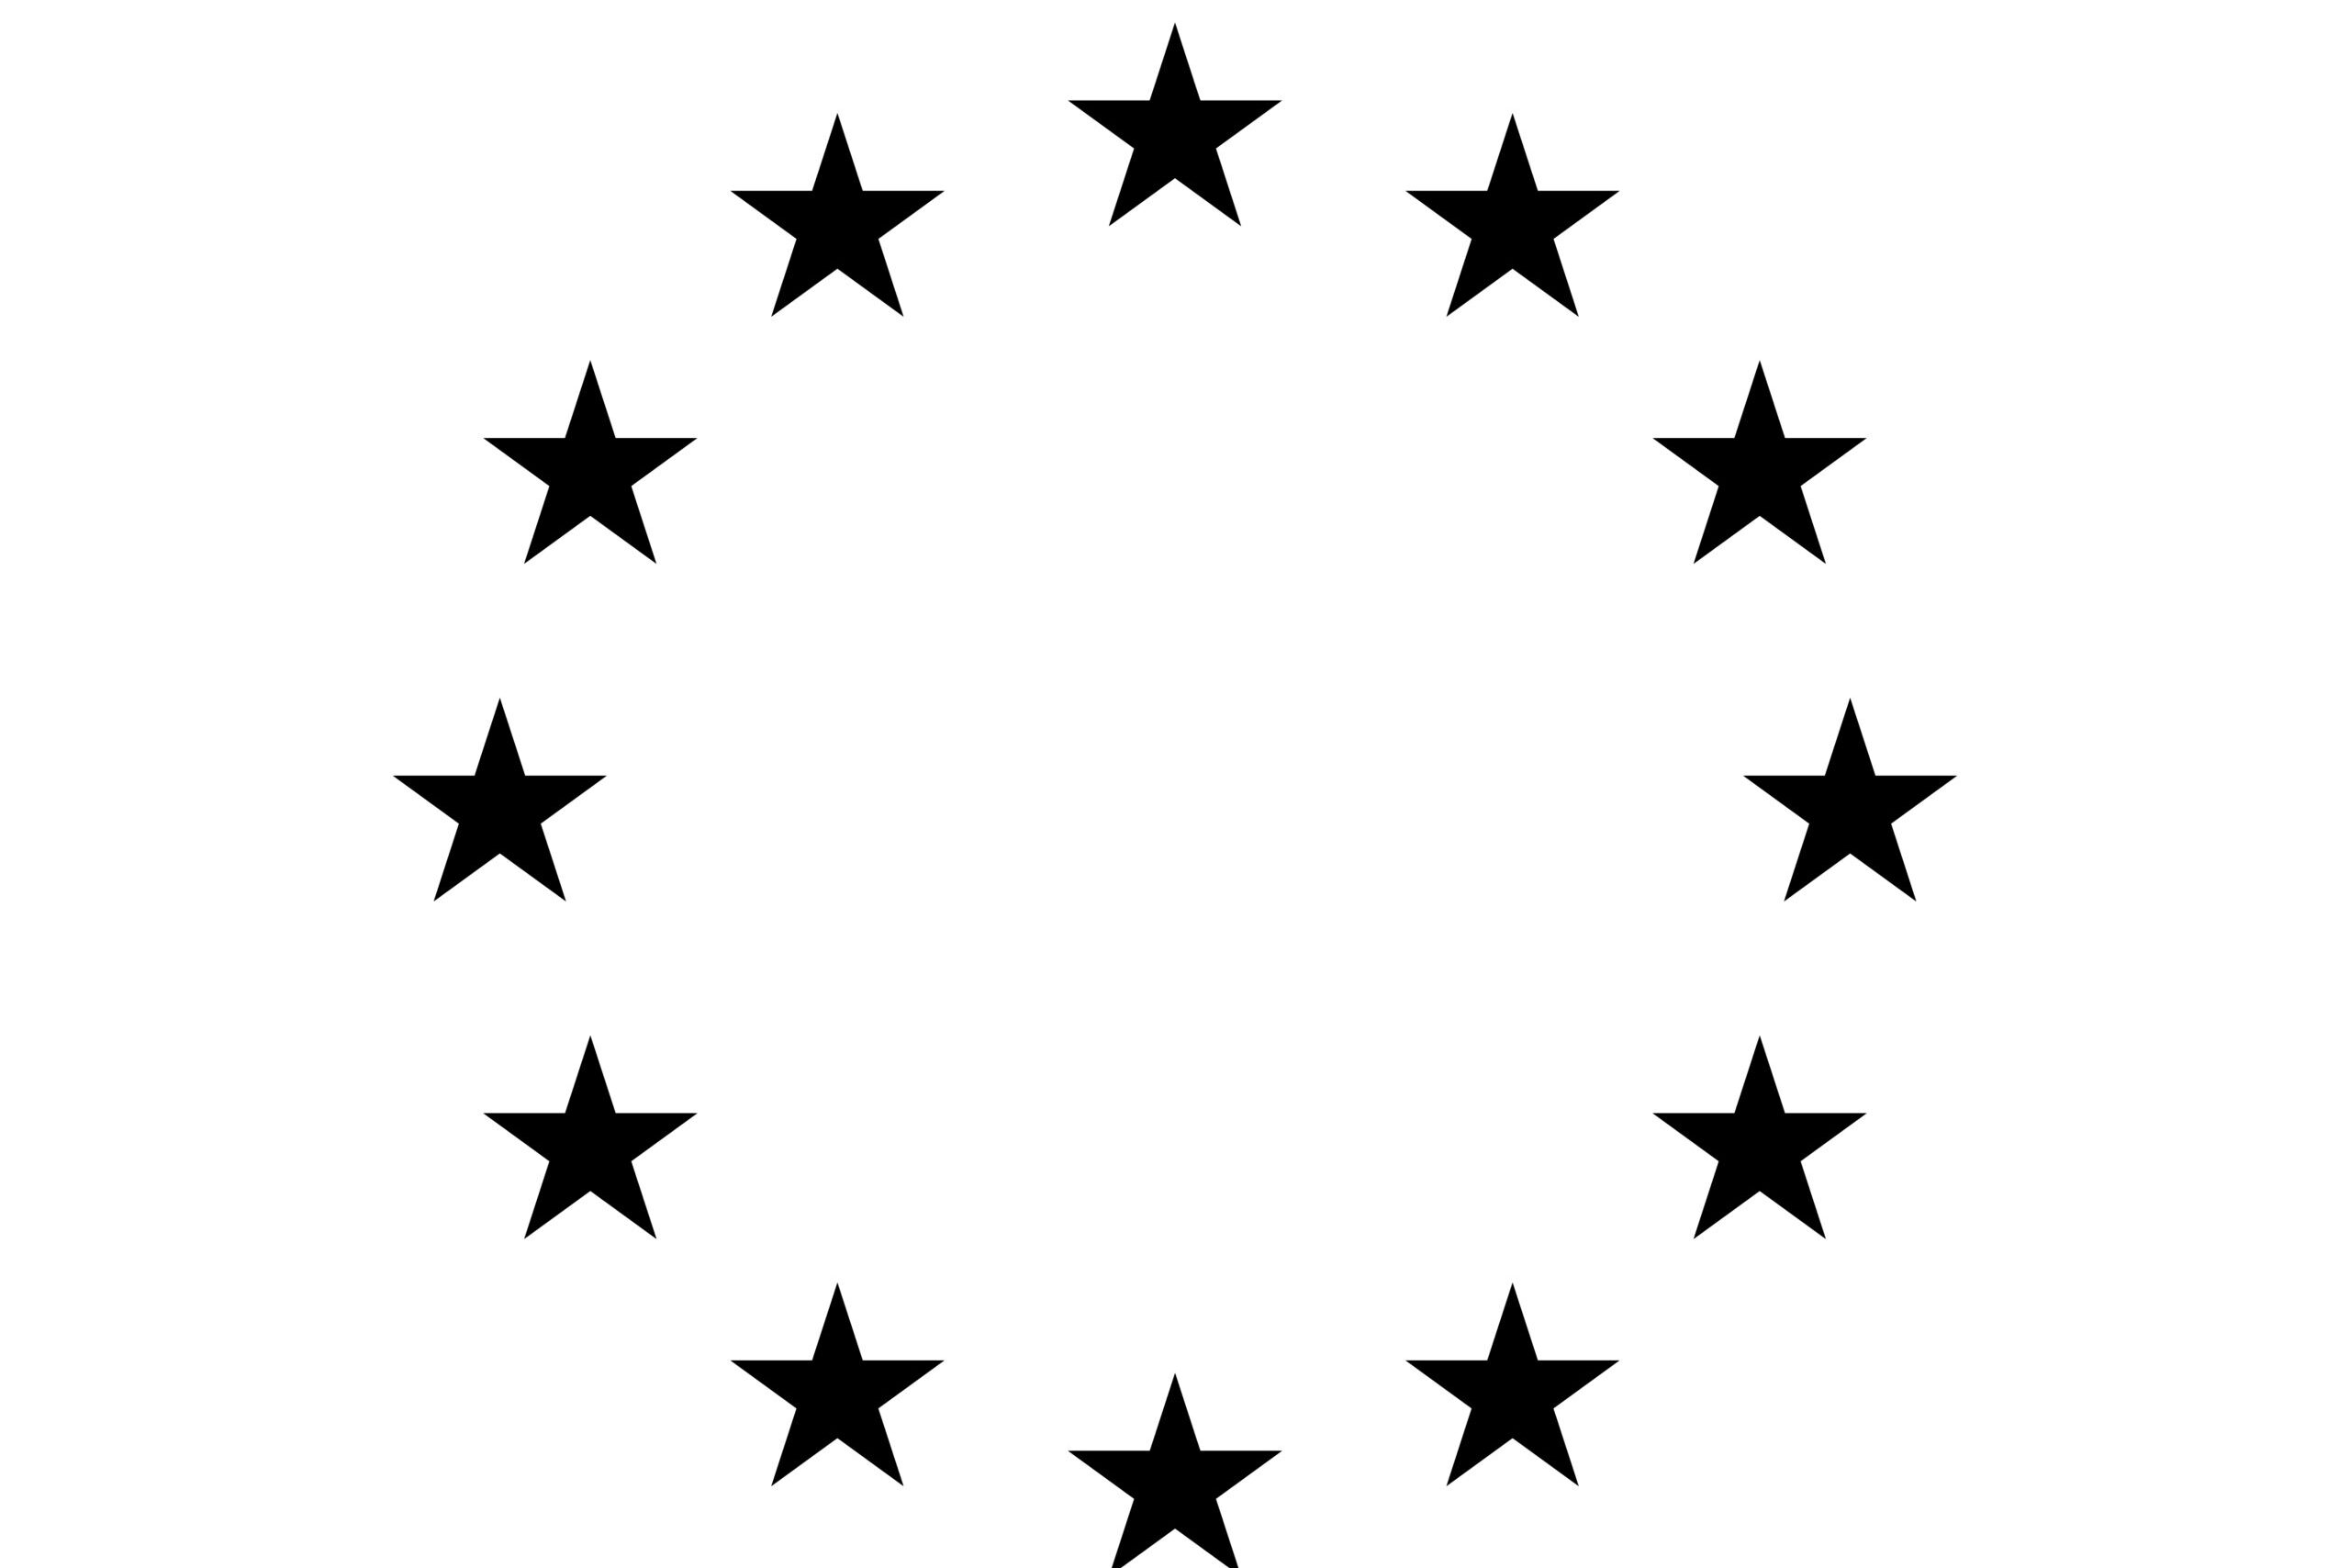 The,Wreath,Of,Stars,Of,Eu,Isolated,On,White,Background.